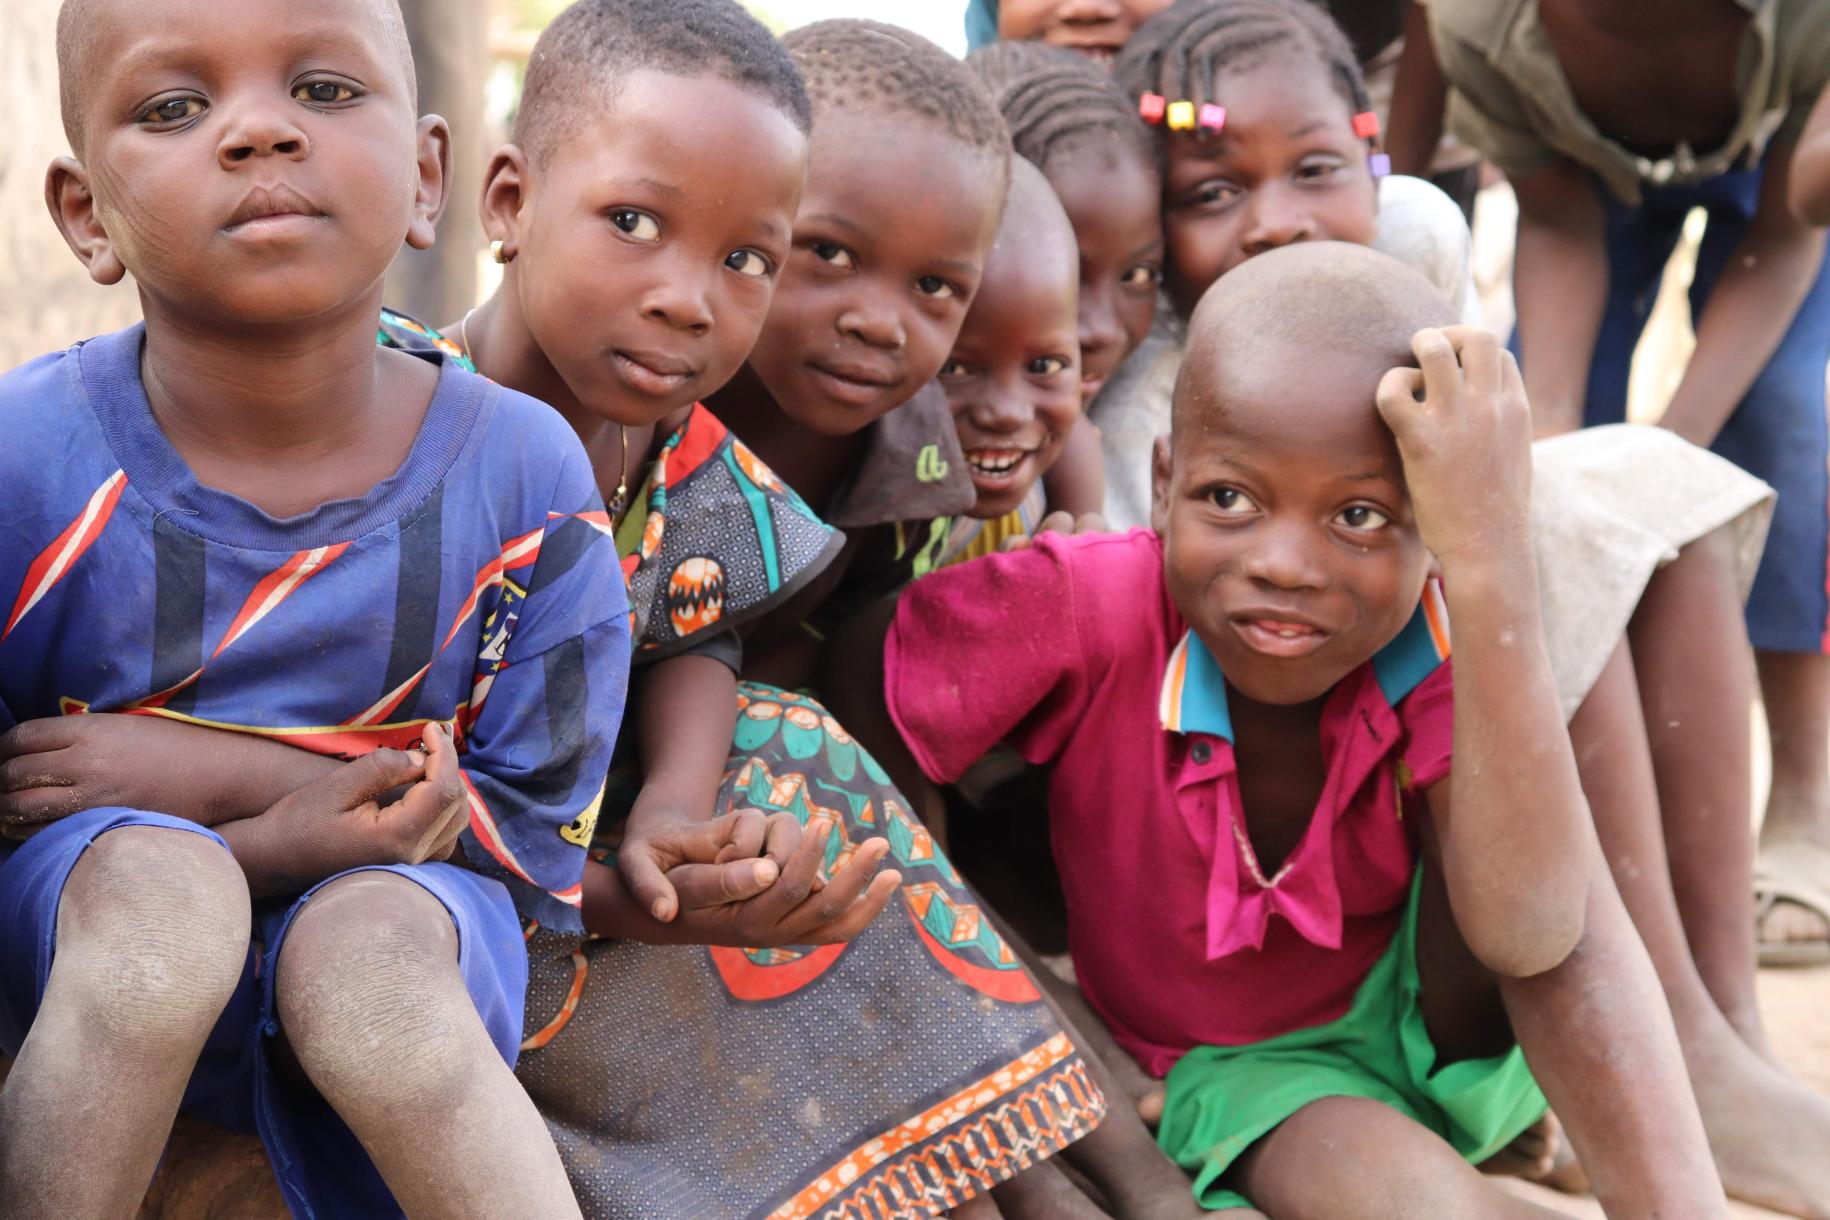 Young children sit together and look curiously at the camera. Birth certificates help ensure these and other children are not left behind.